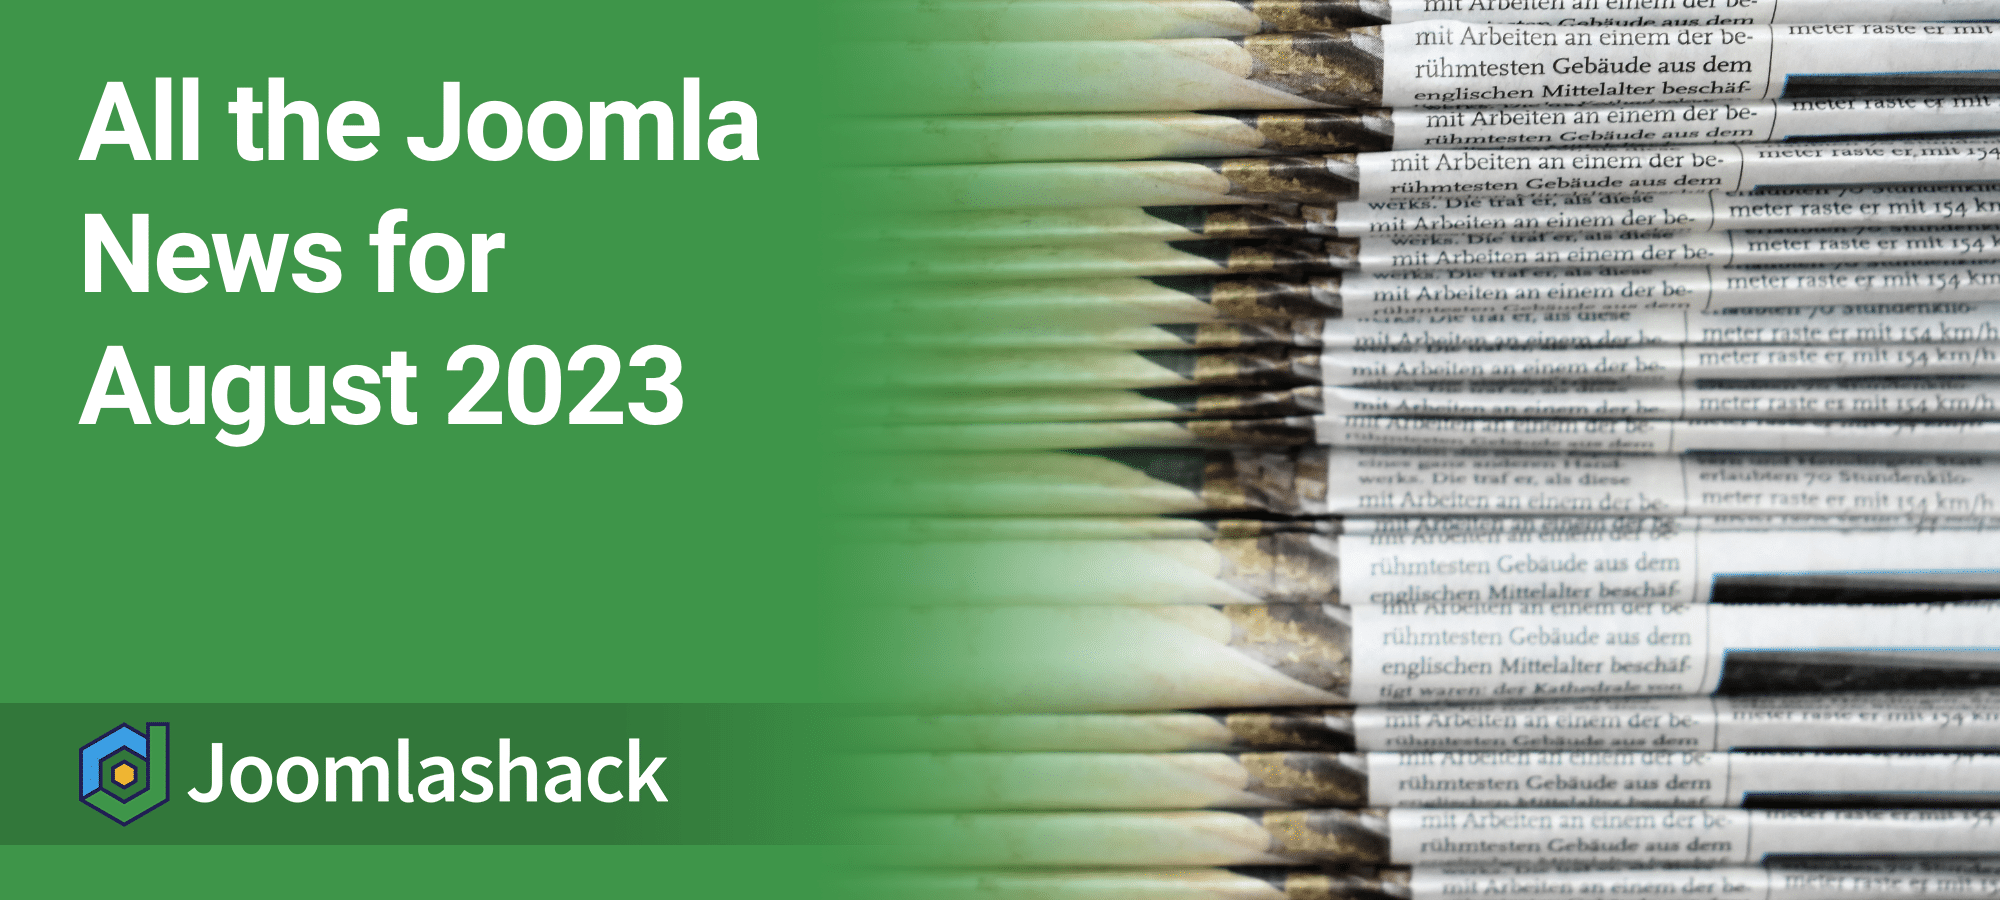 All the Joomla News for August 2023